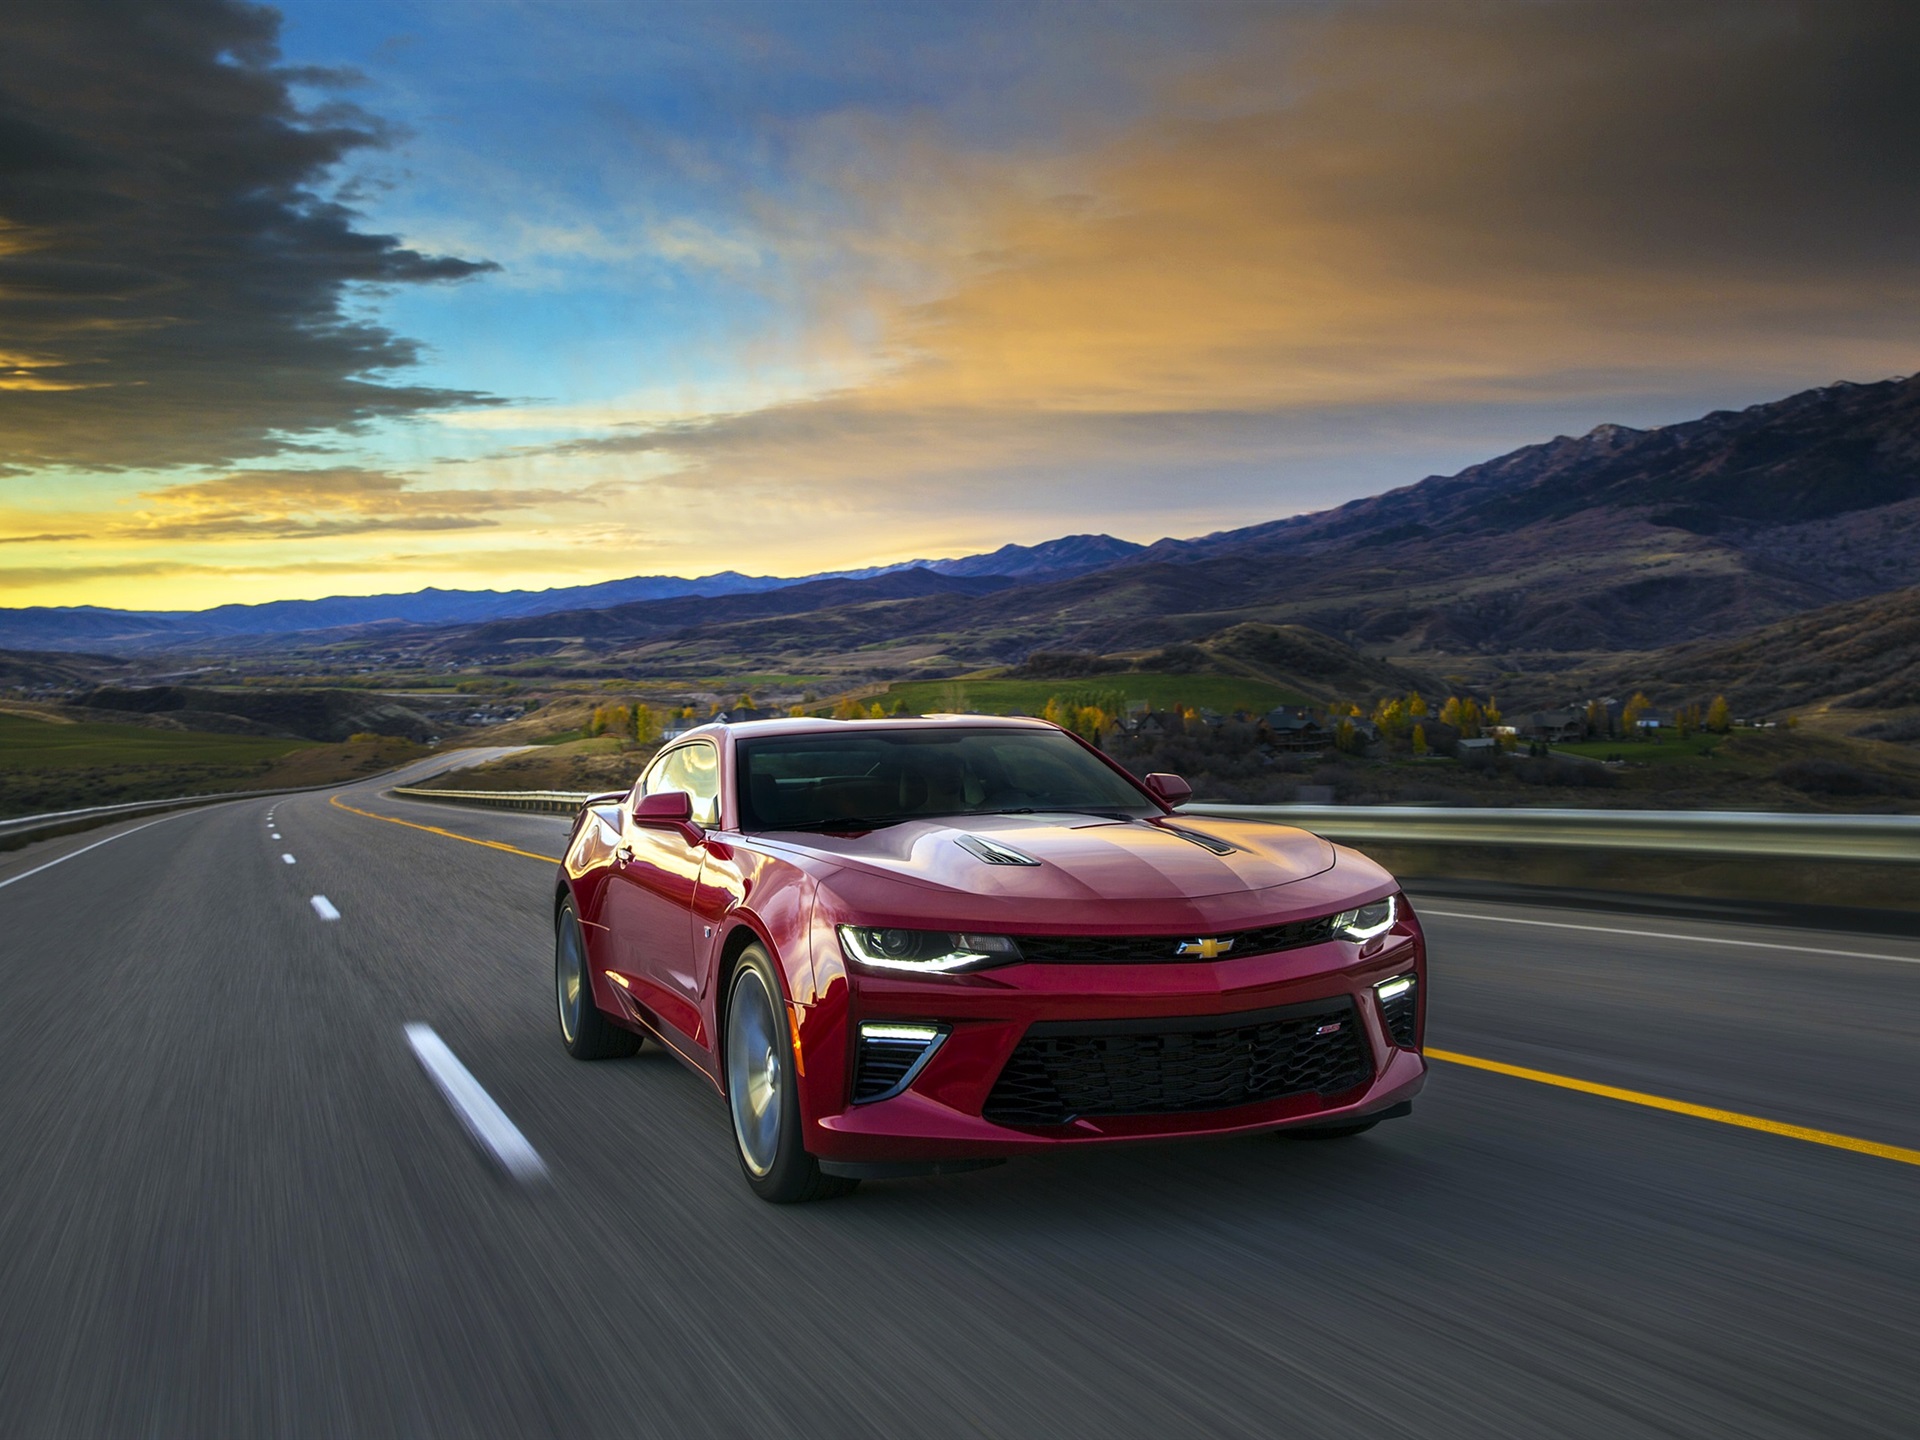 Wallpaper Chevrolet Camaro red supercar, speed, road, sunrise 2560x1600 HD Picture, Image